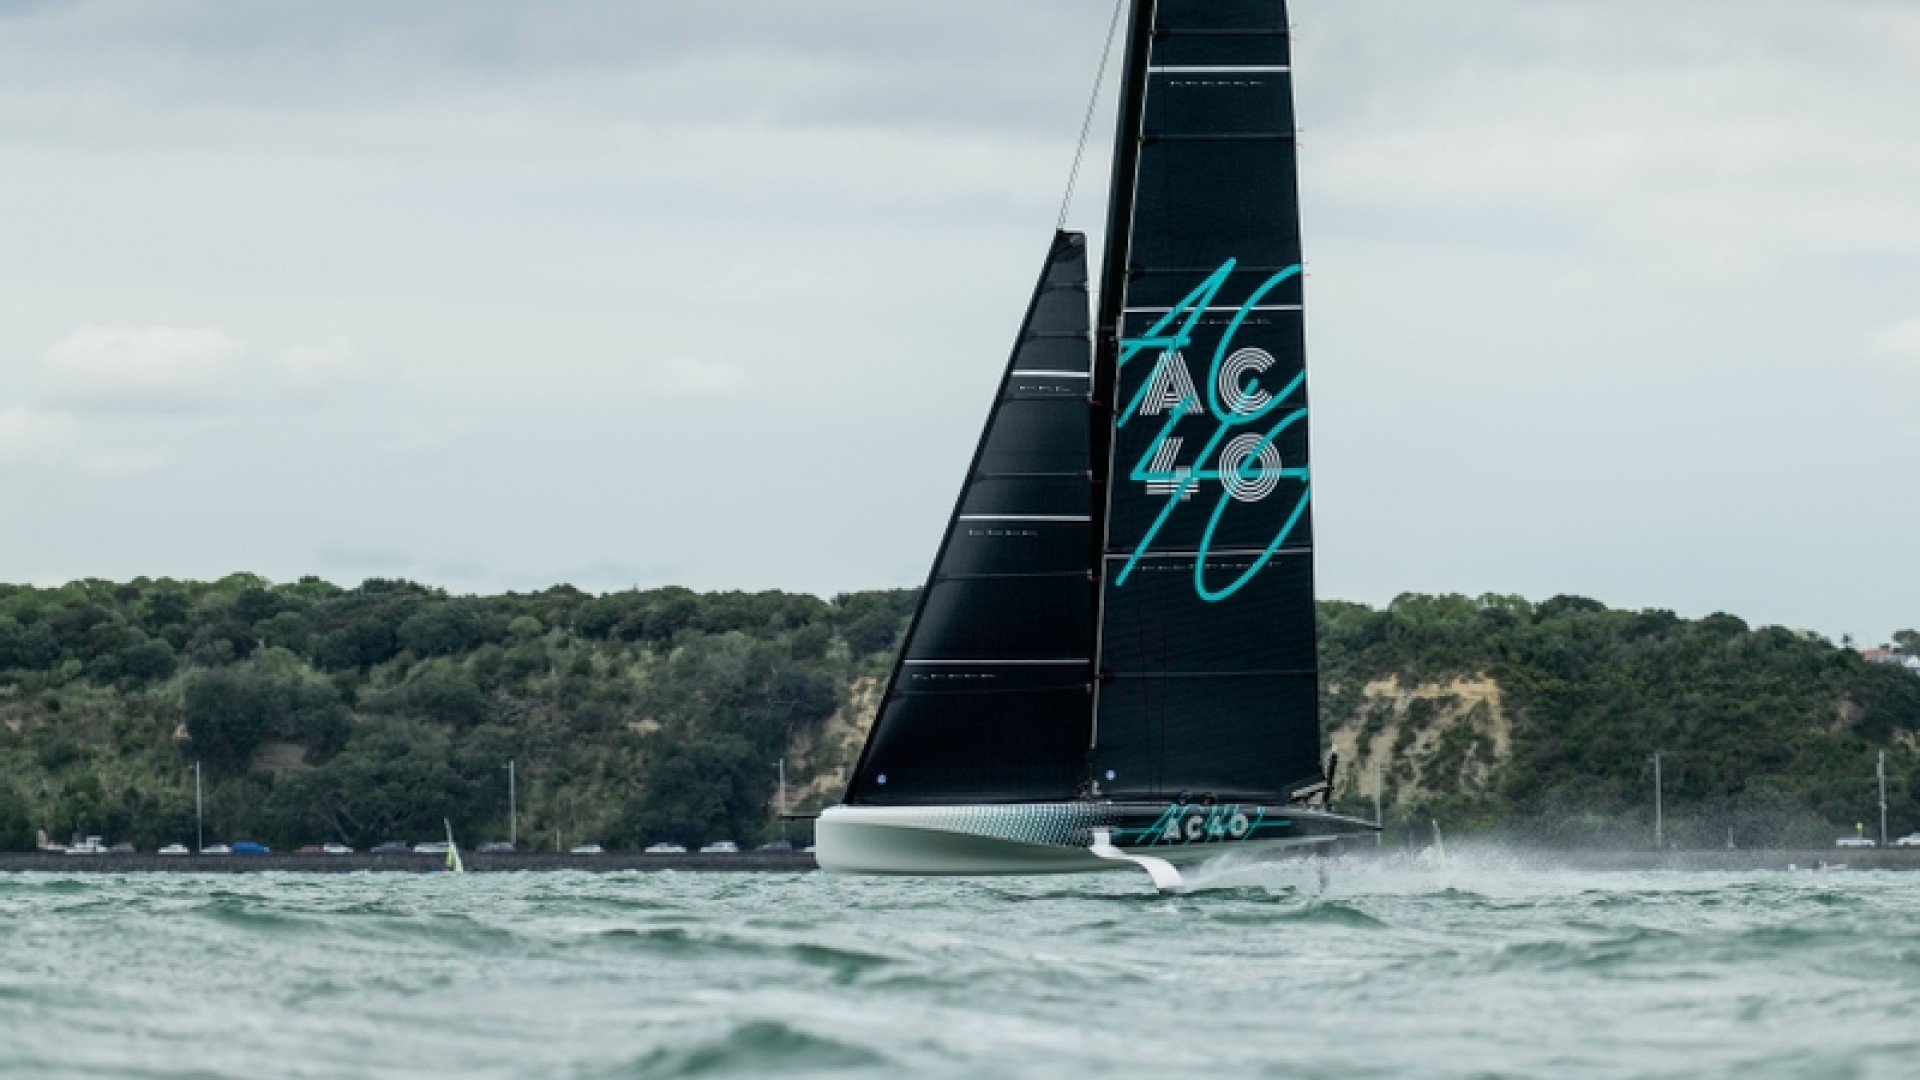 The AC40 wins World Sailing’s Boat of the Year 2023